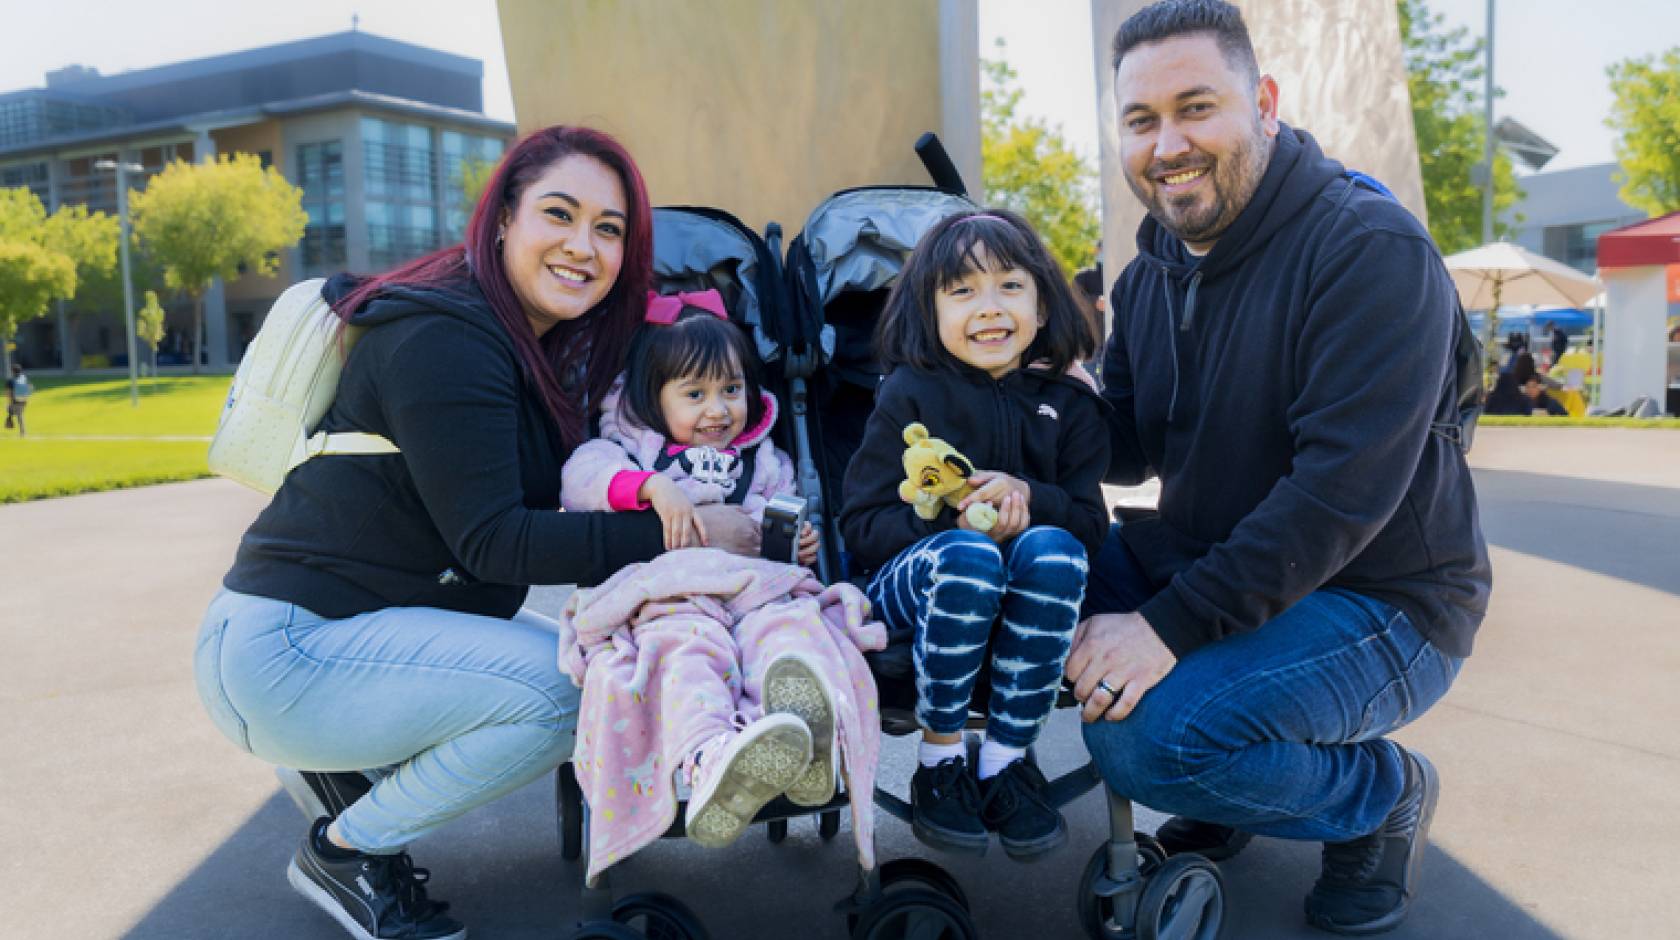 A family with two parents and two young children in a stroller